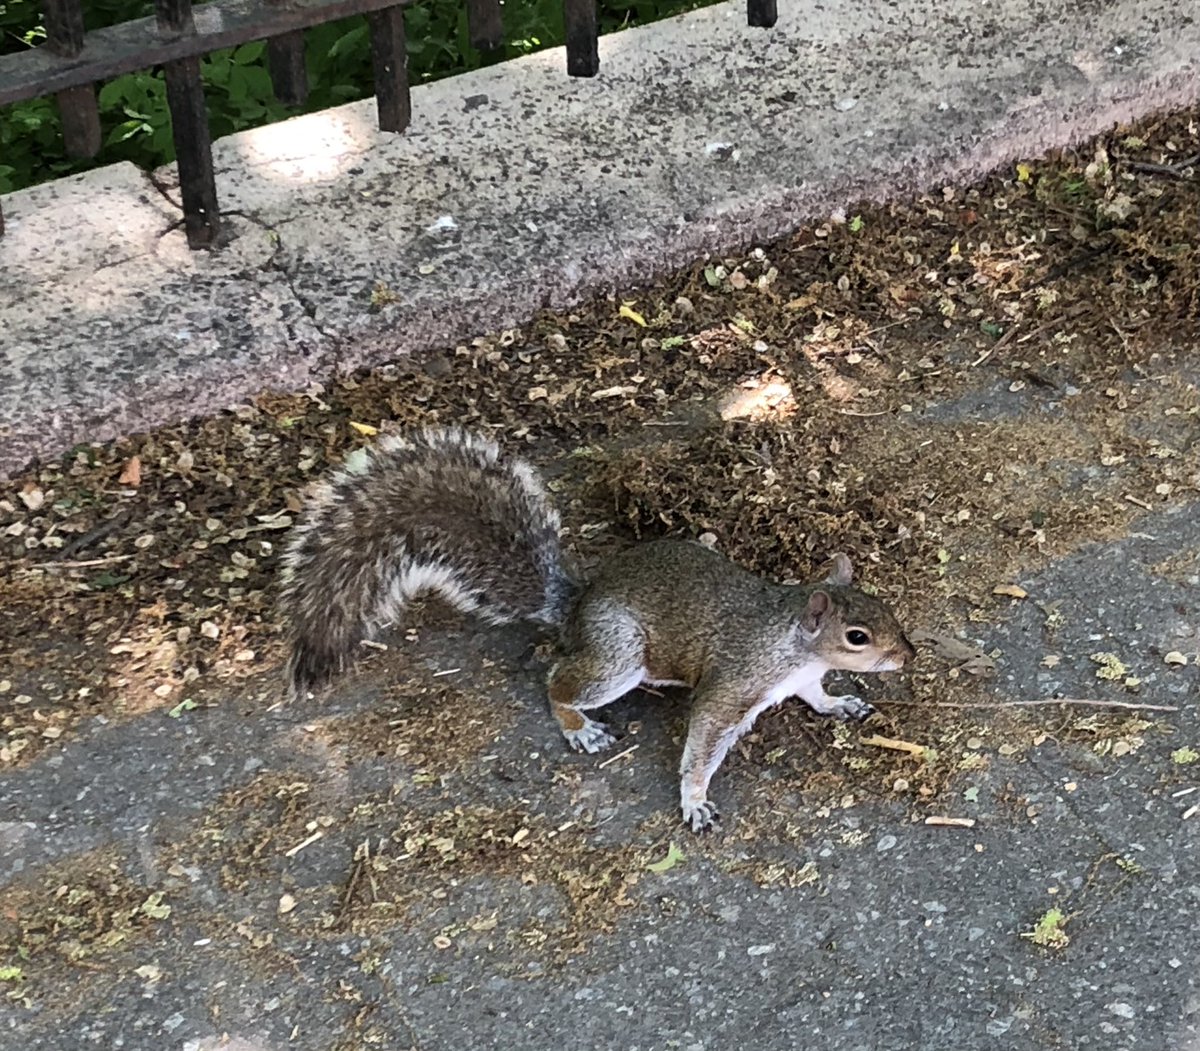 Squirrels just want to have fun...like this one who tried to follow me home. #BrooklynLife